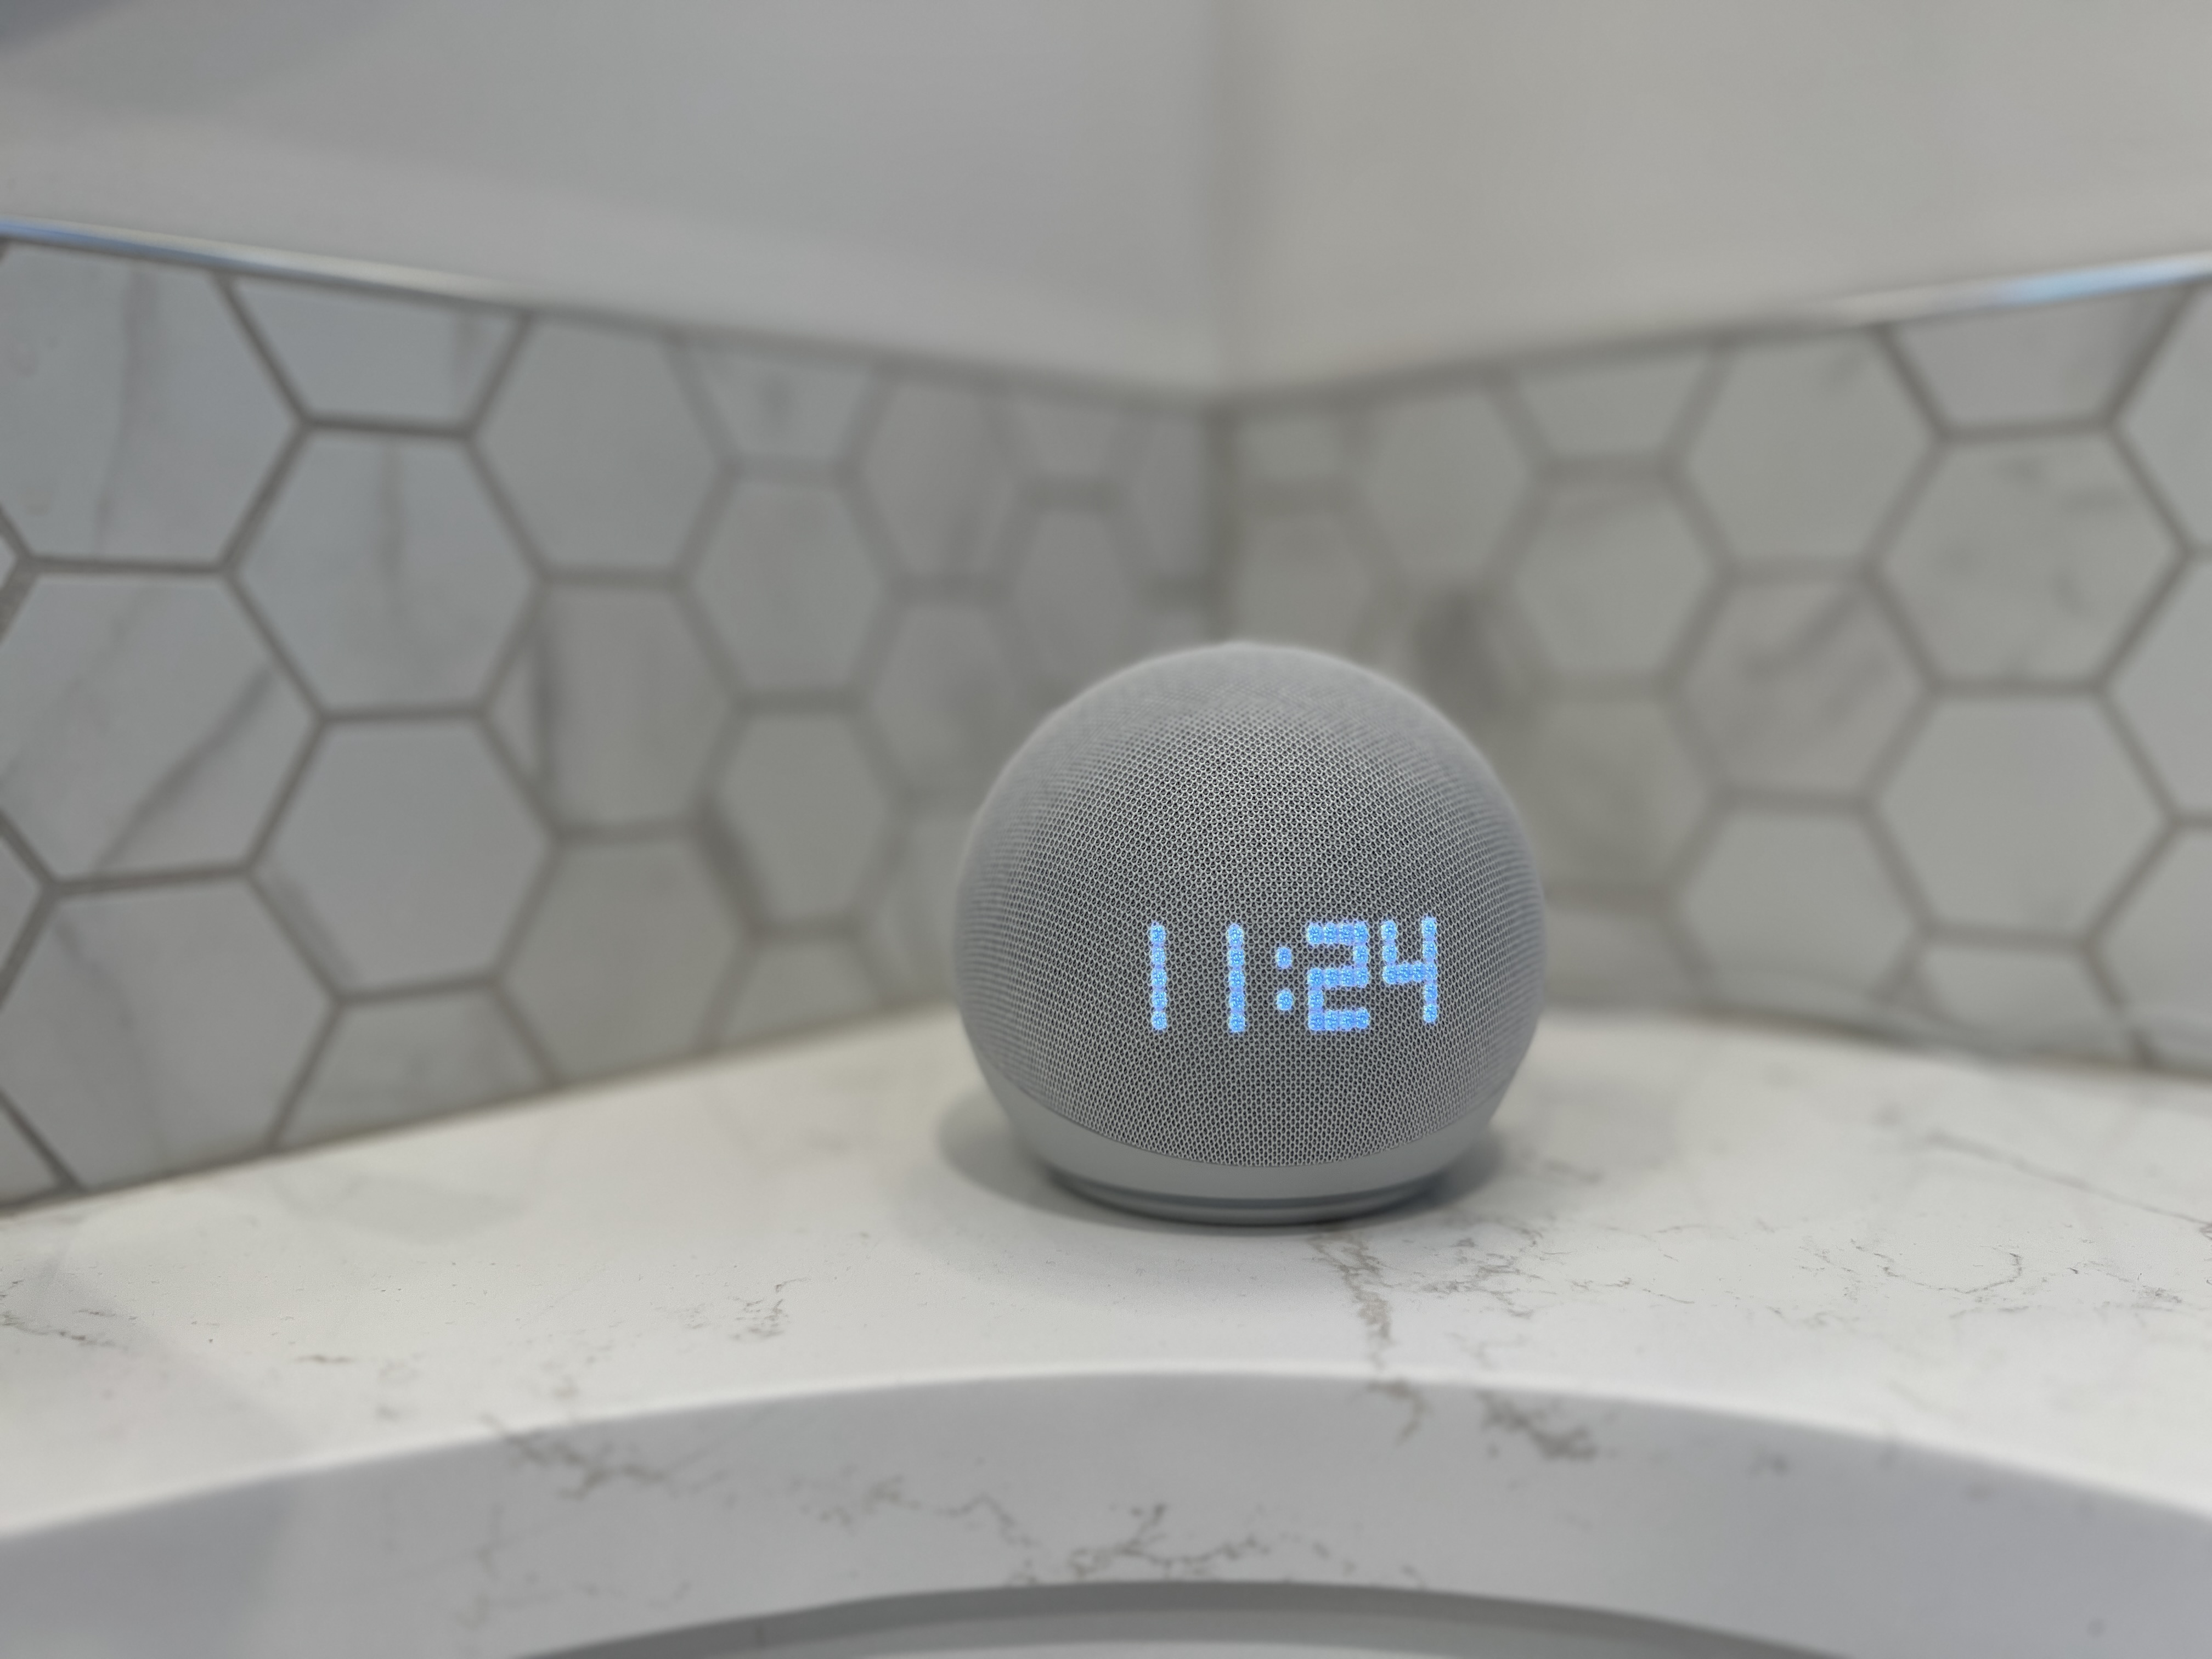 ECHO DOT 4TH GEN WITH CLOCK UNBOXING AND SETUP